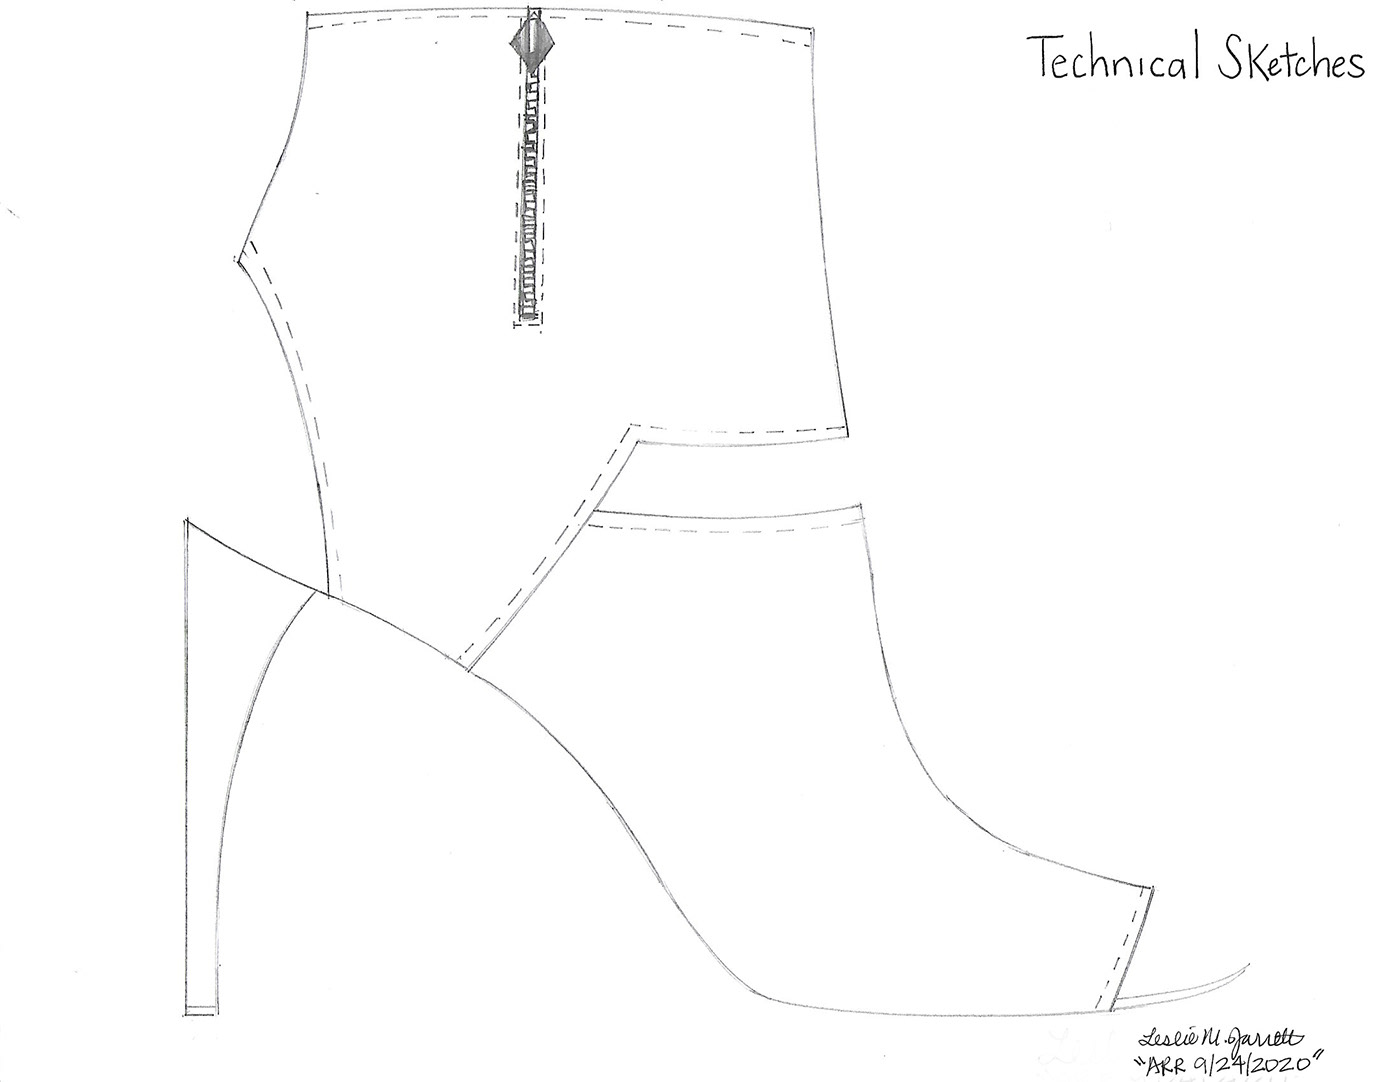 accessories design footwear product development shoes sketches